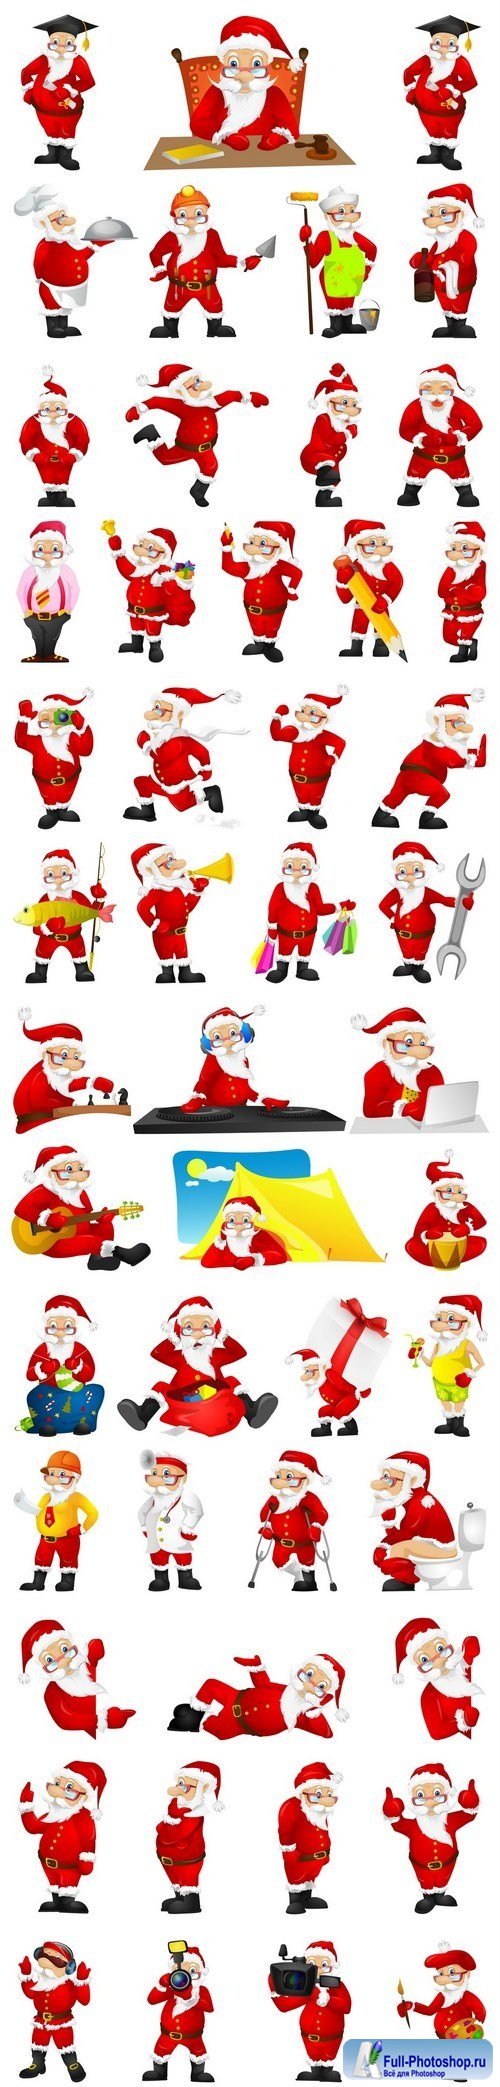 Life and style Santa Claus 2 - 7xEPS